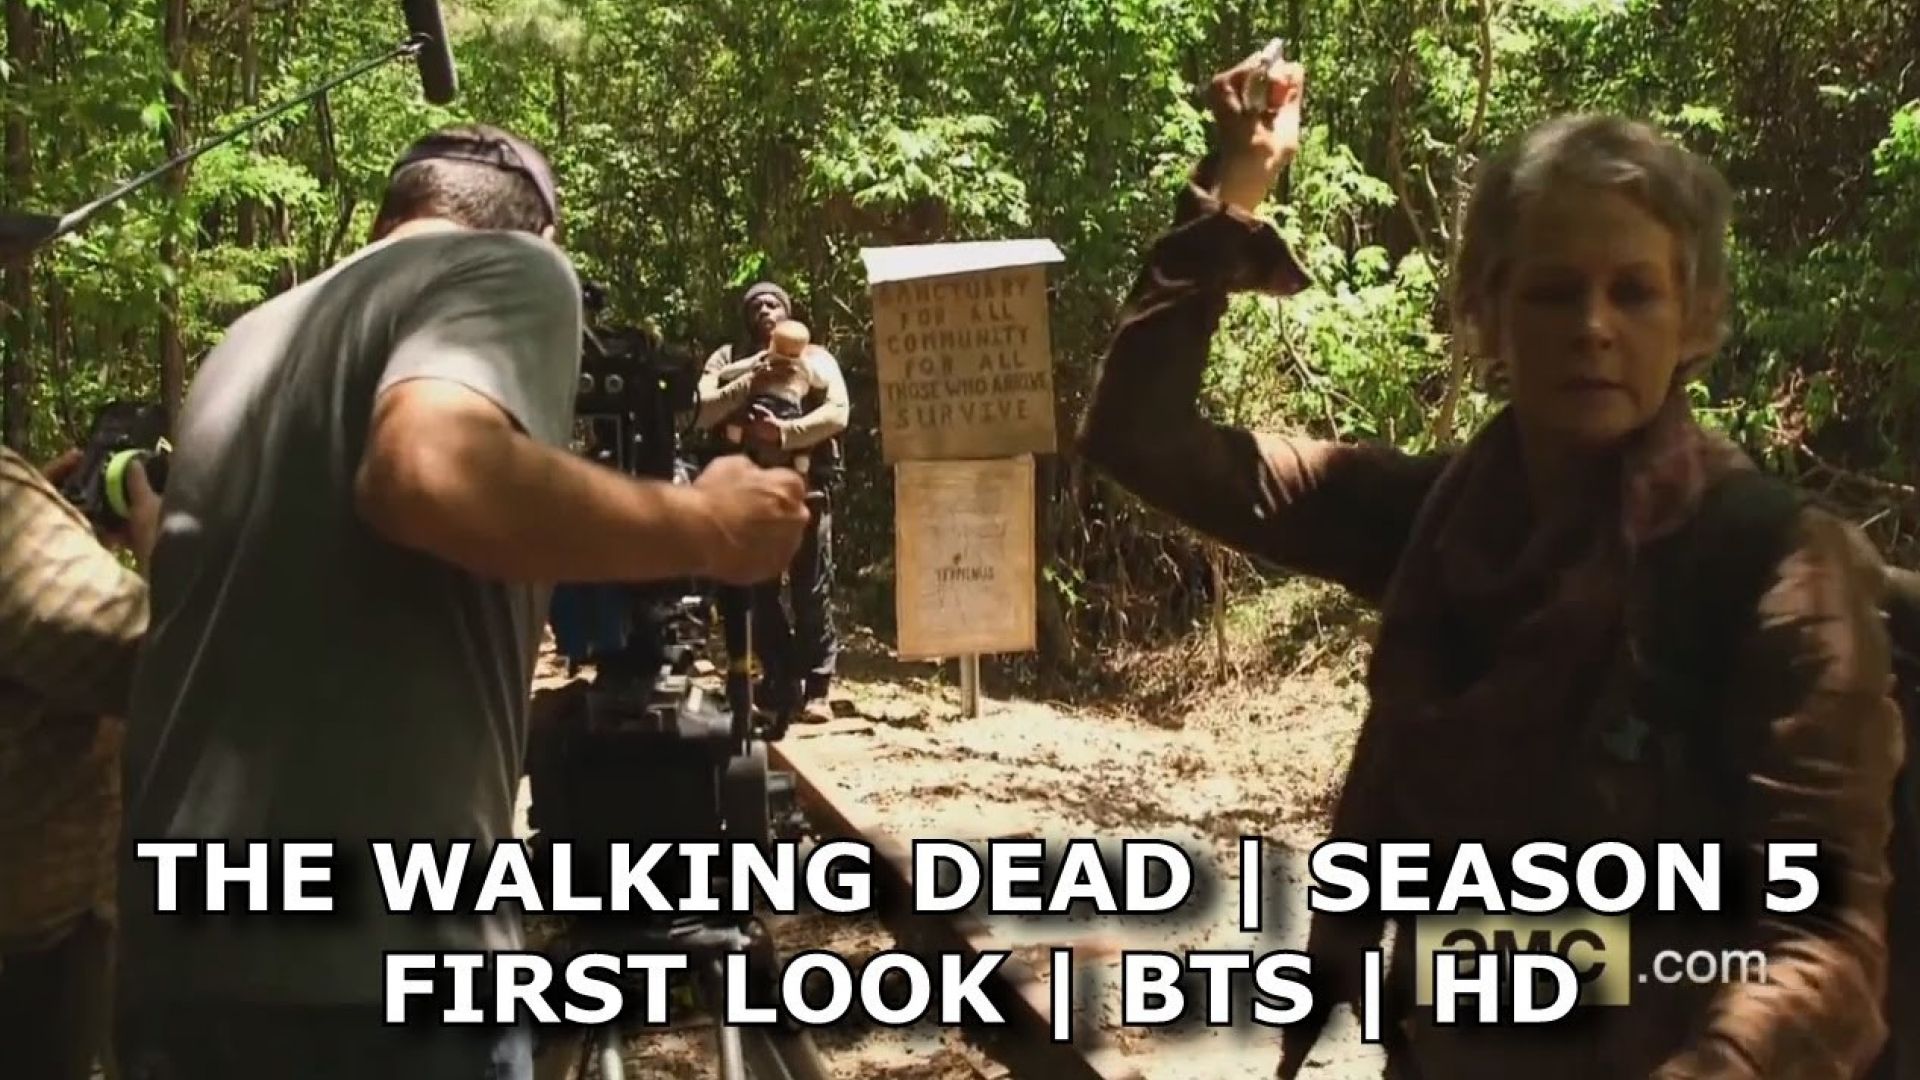 The Walking Dead Season 5: First Look &amp; Greeting From Set